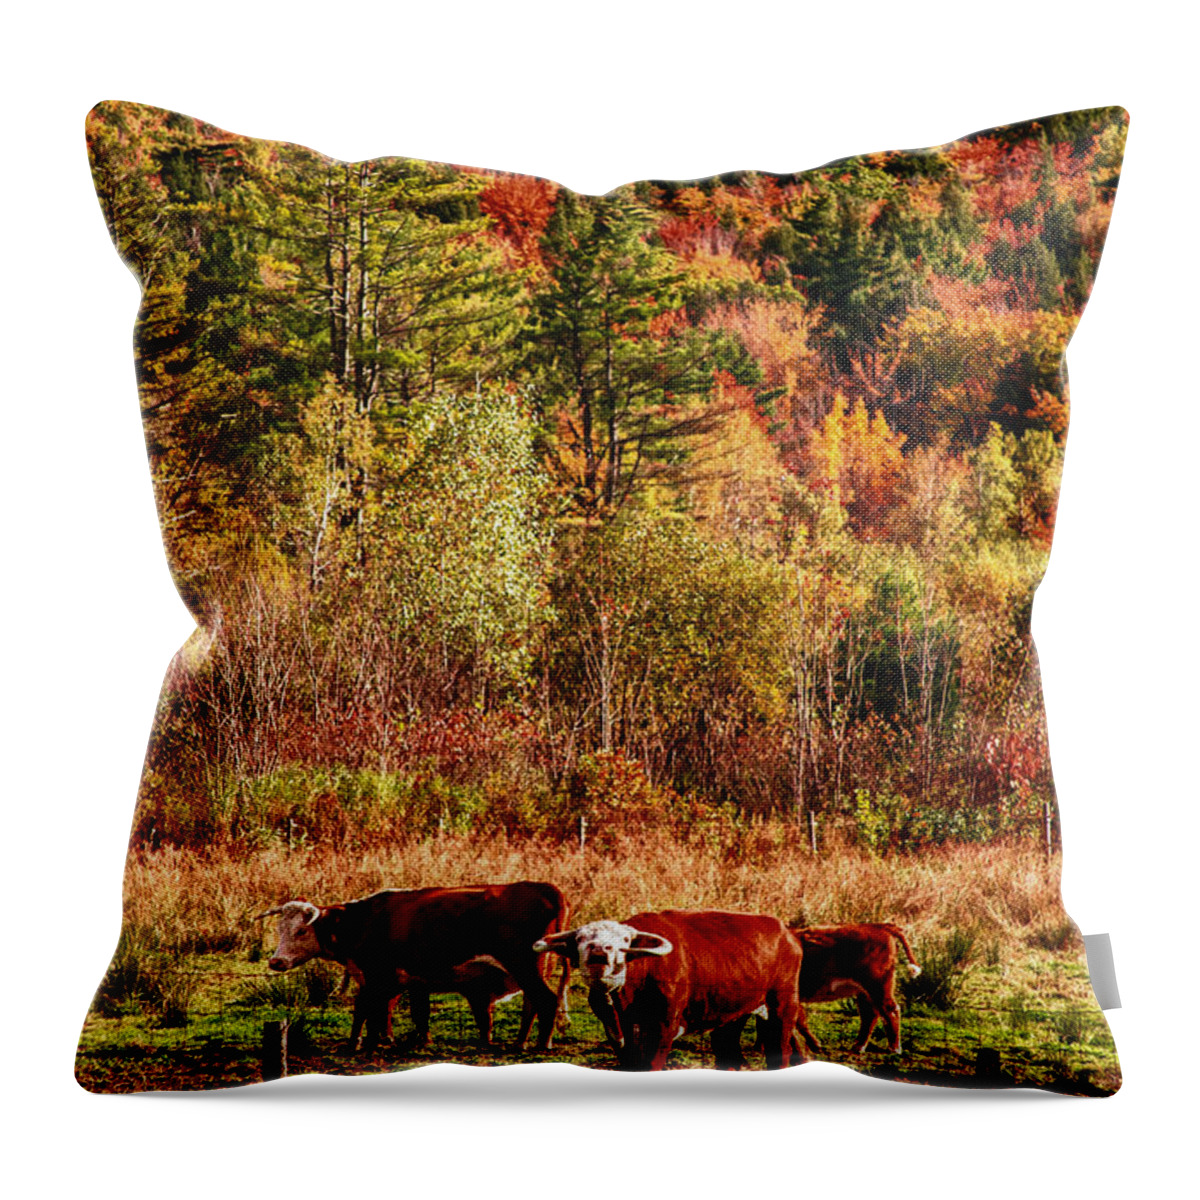 Autumn Foliage Throw Pillow featuring the photograph Cow complaining about much by Jeff Folger